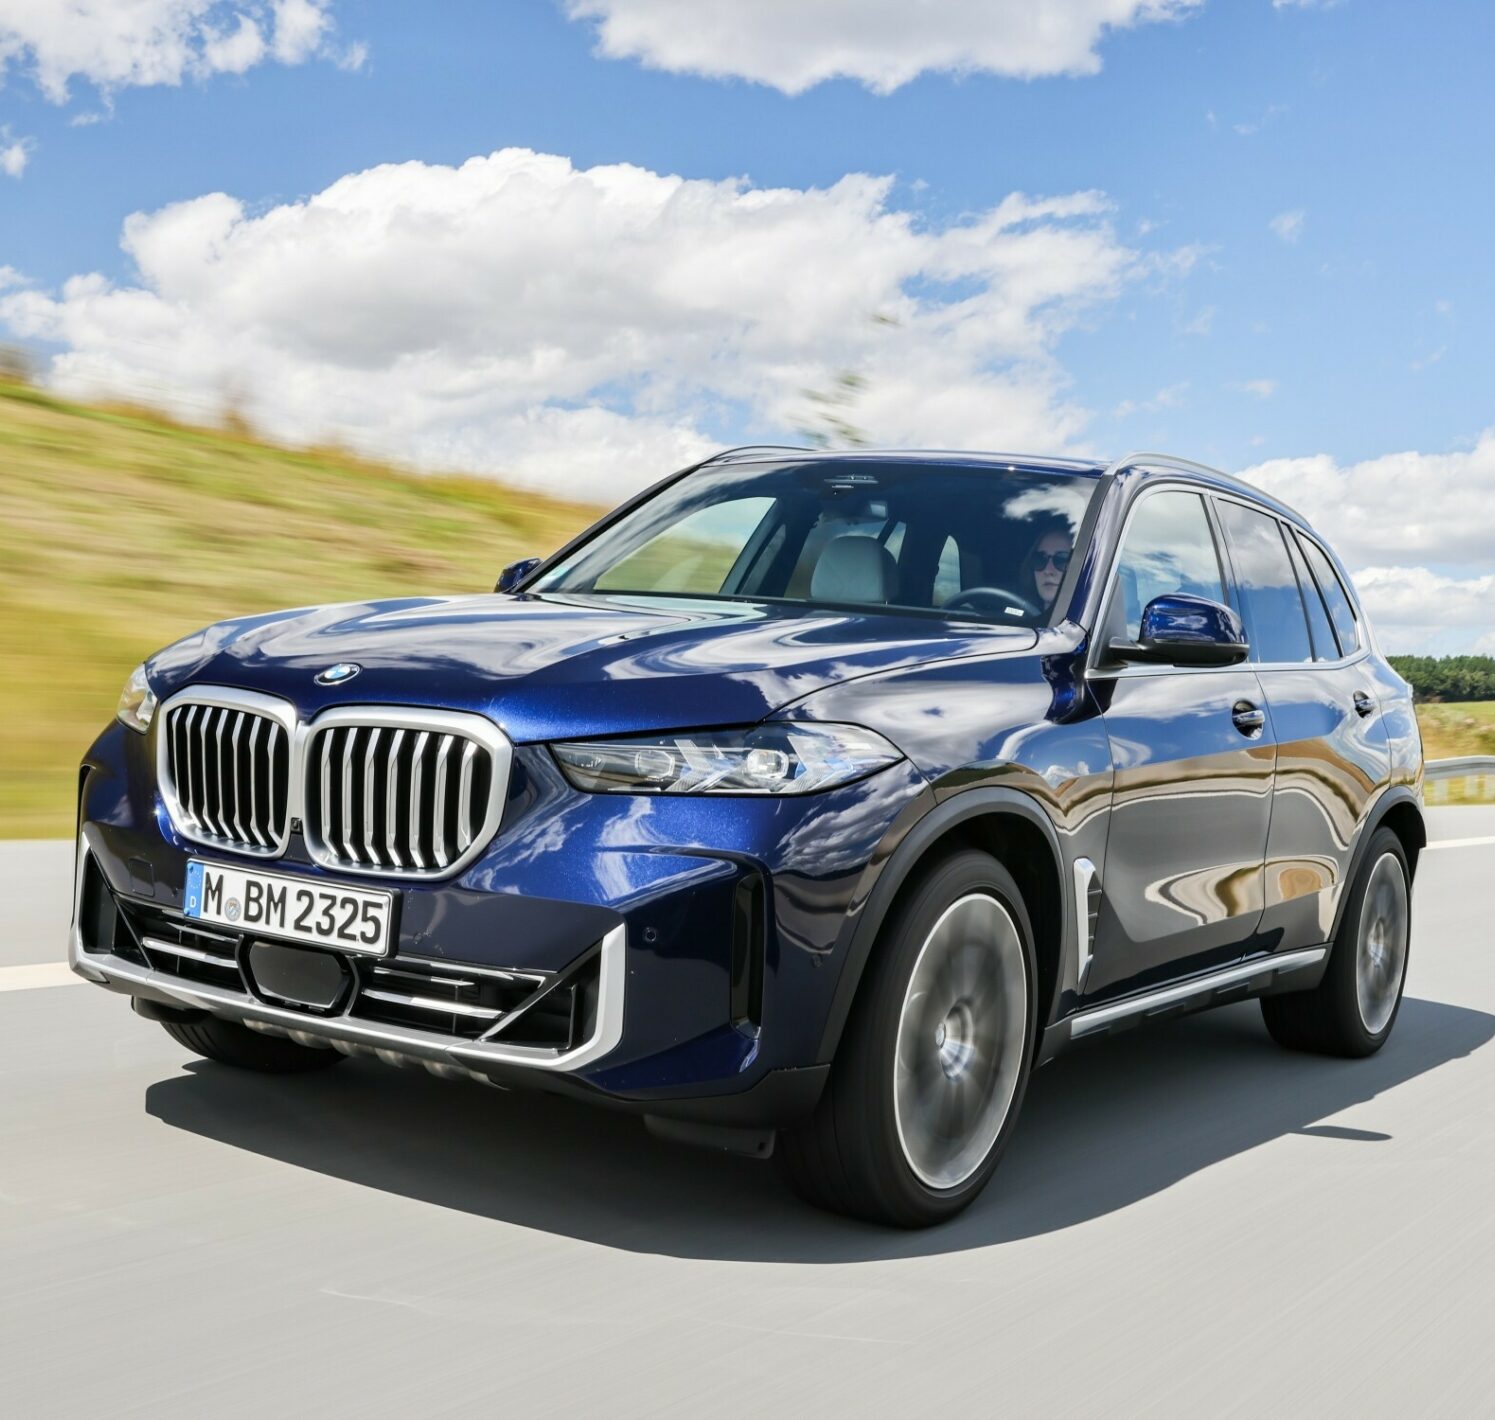 https://autofilter.sk/assets/images/x5/gallery/P90518137_lowRes_the-new-bmw-x5-08-23.jpg - obrazok